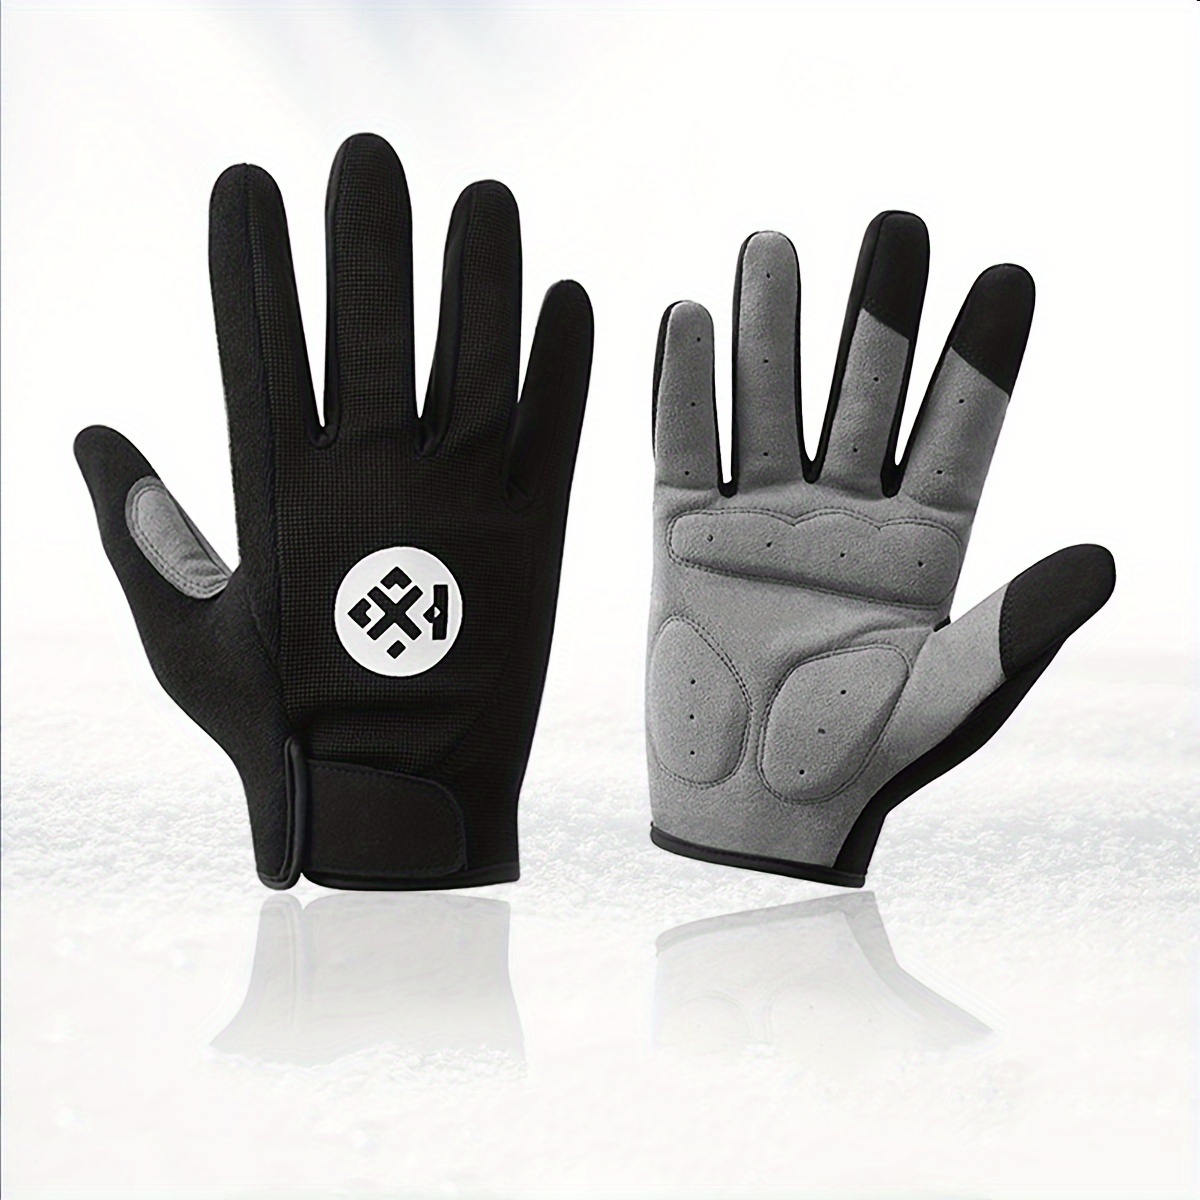 Cycling Gloves for Sale